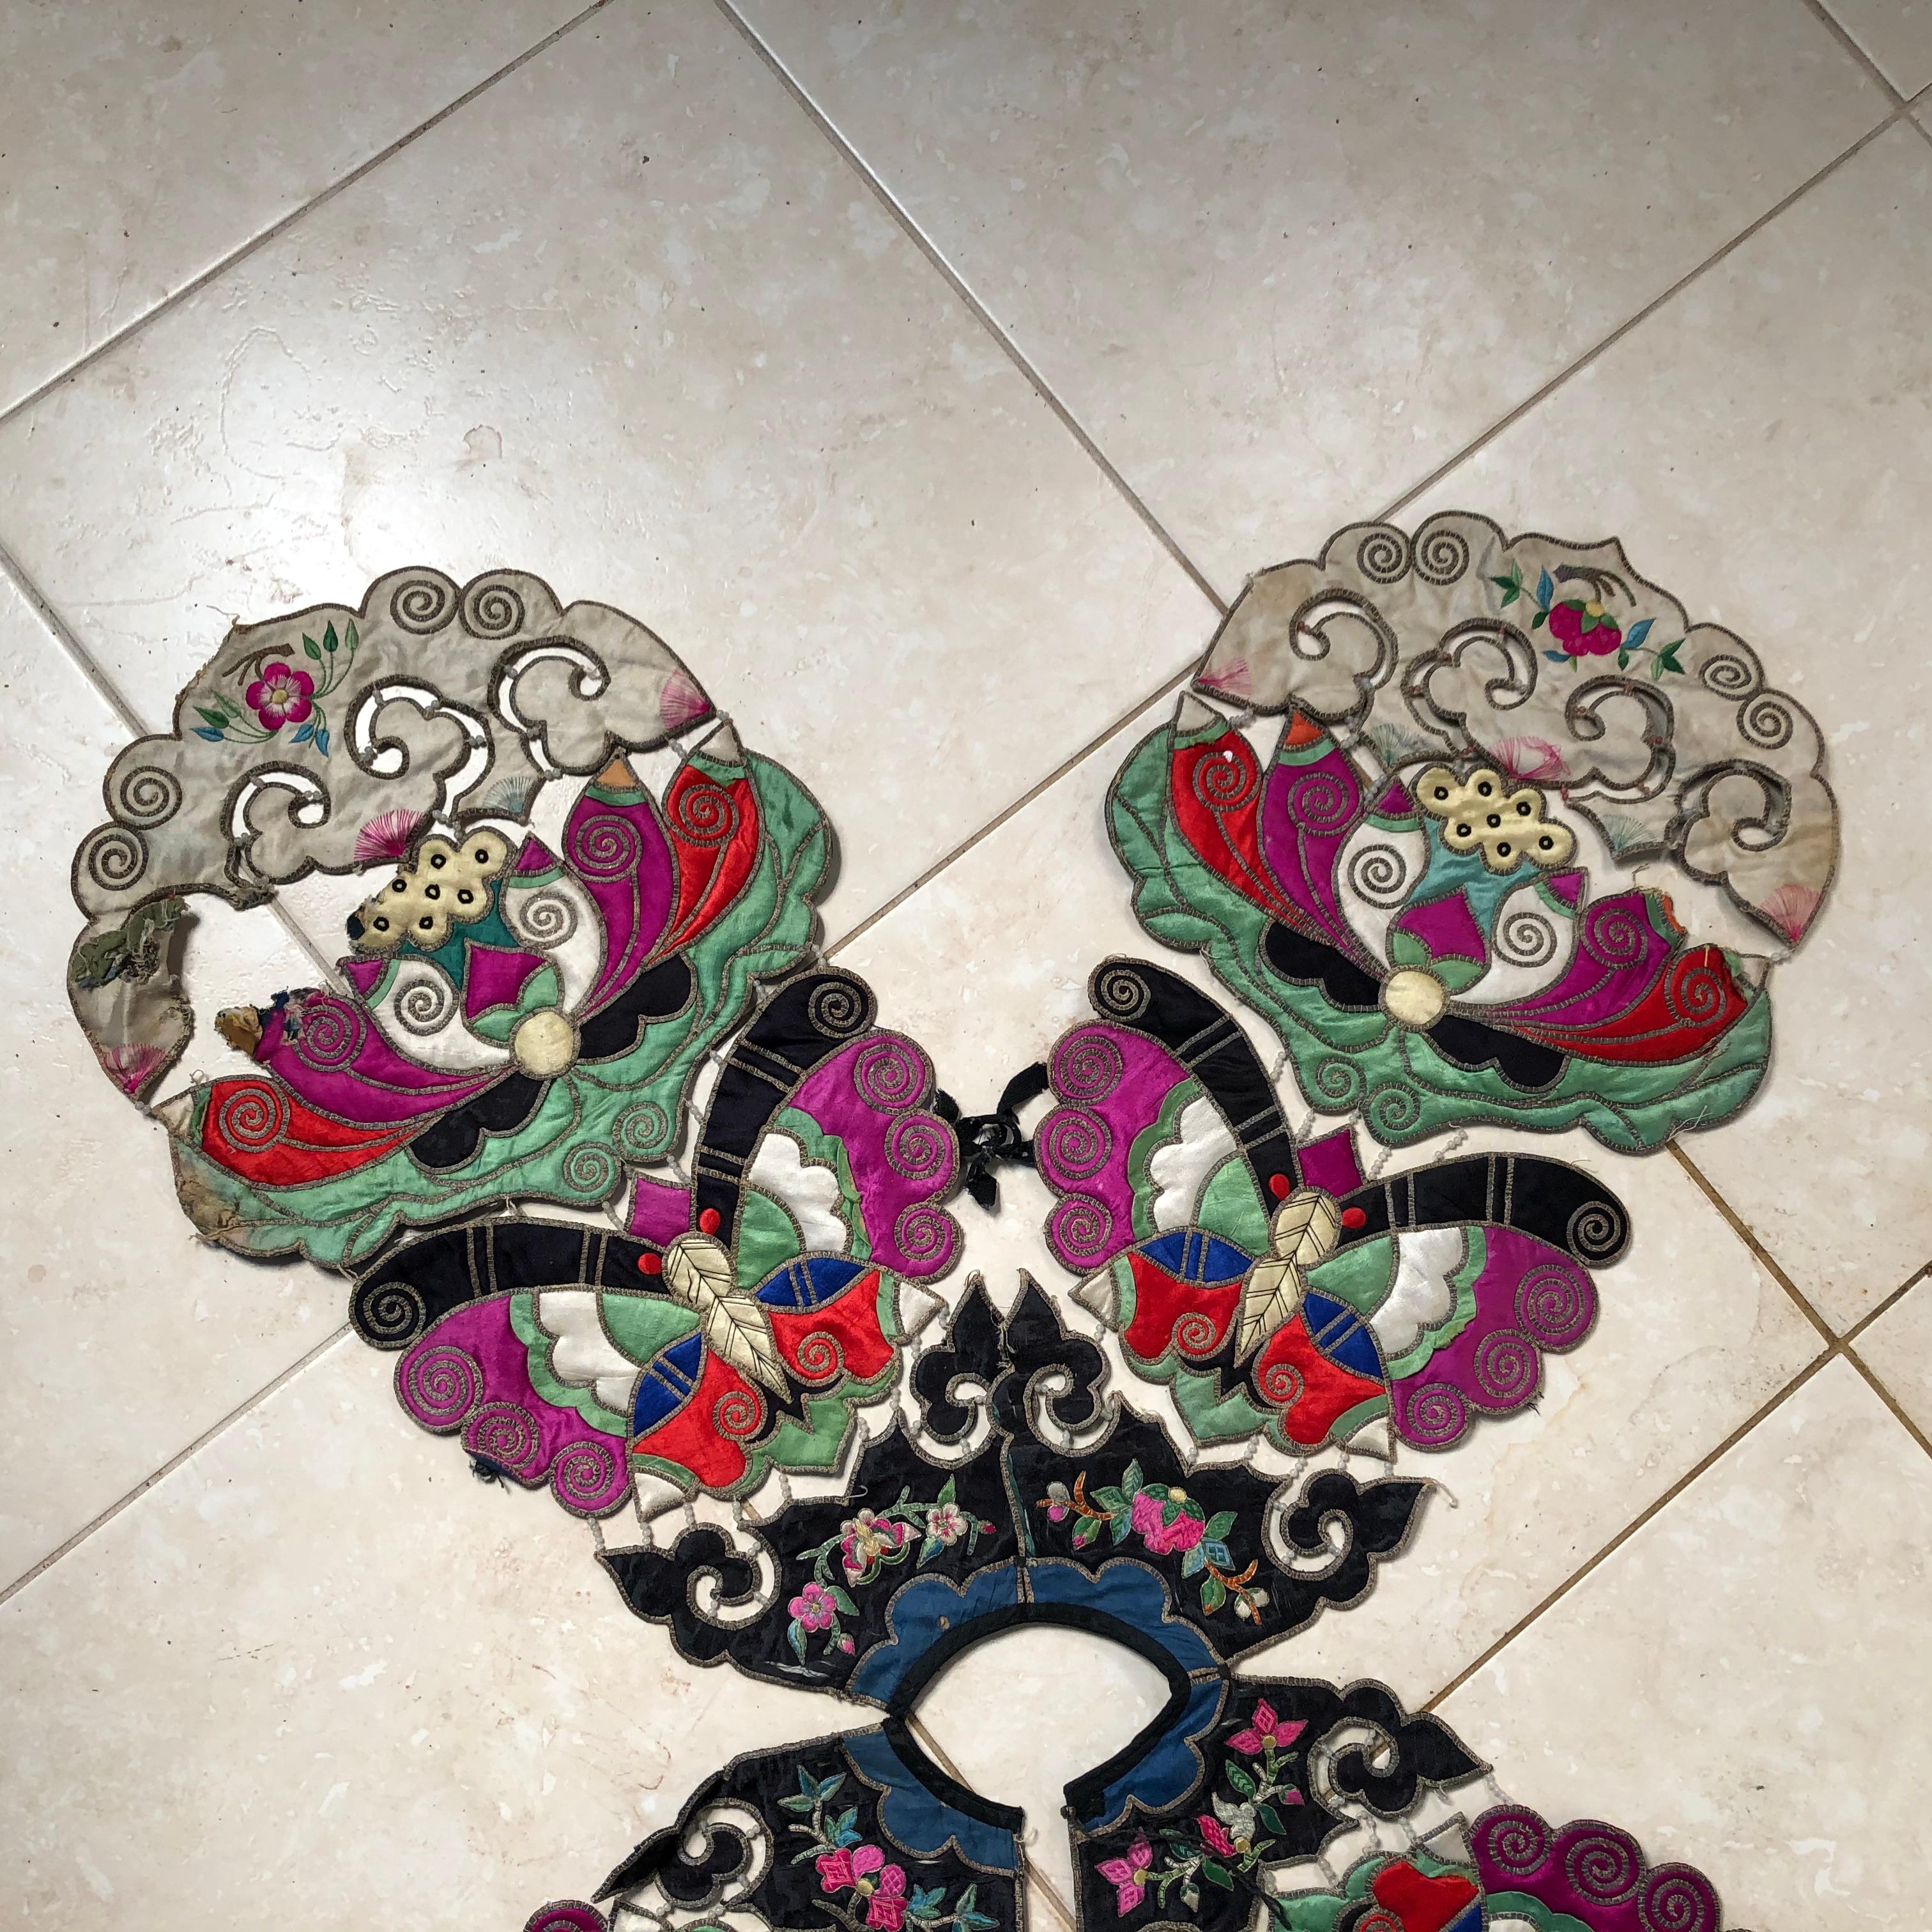 An opportunity to acquire a lovely antique Chinese hand sewn vest or colorful textile pieced together in four wing like sections, all in vibrant colors. 

Immediately wearable or frameable.

Dimensions: 40 inches by 34 inches tall and 3 inches